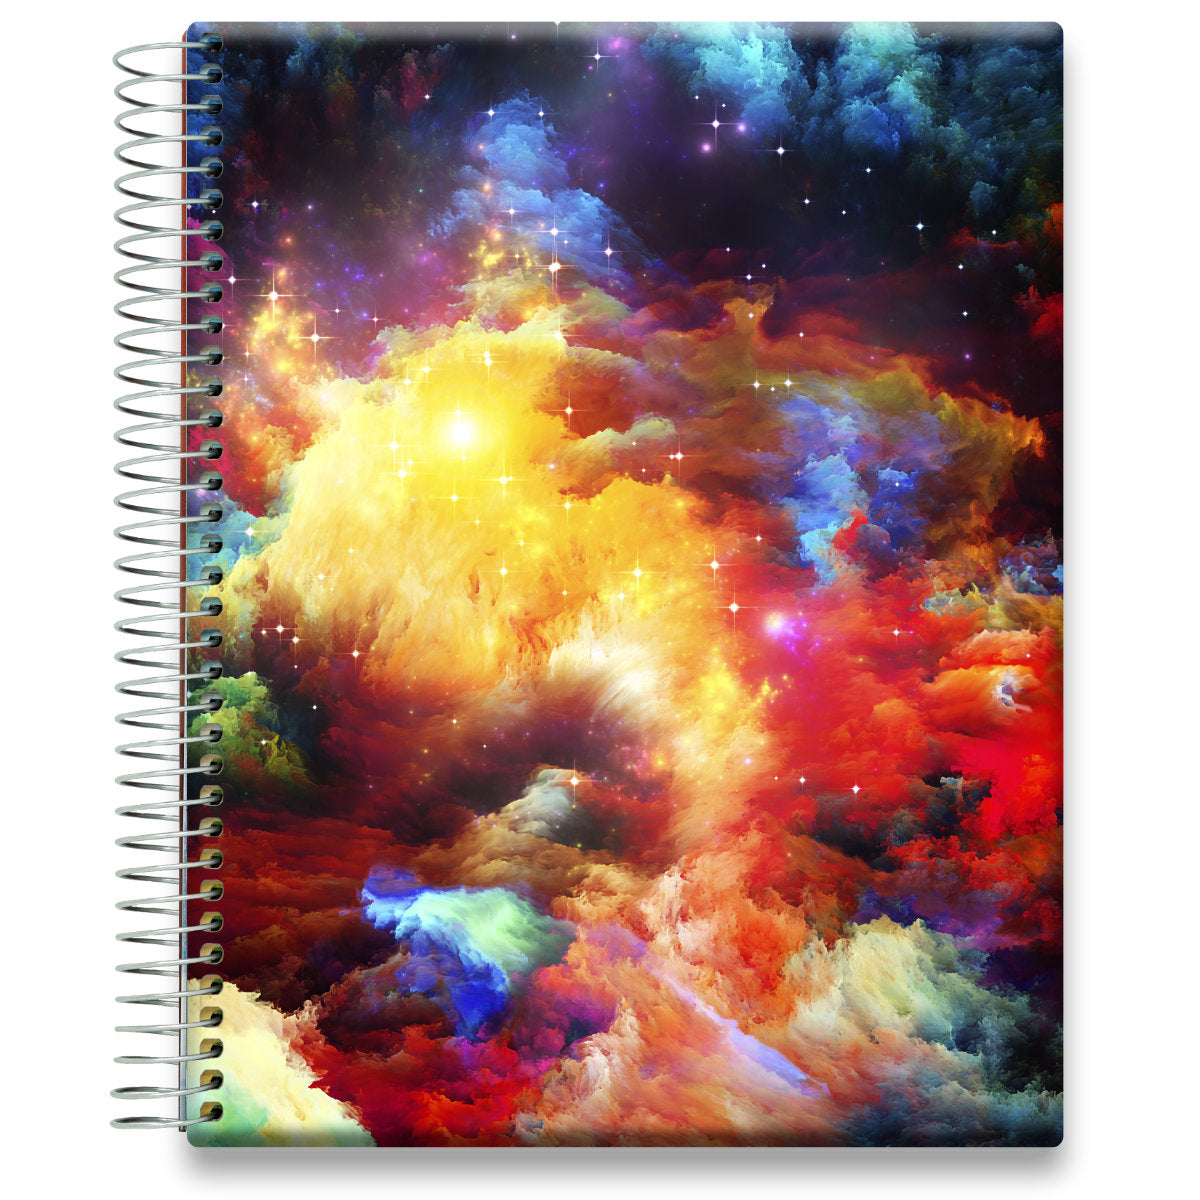 Coaching Session + May 2024 to Jun 2025 Planner - Cosmic Art